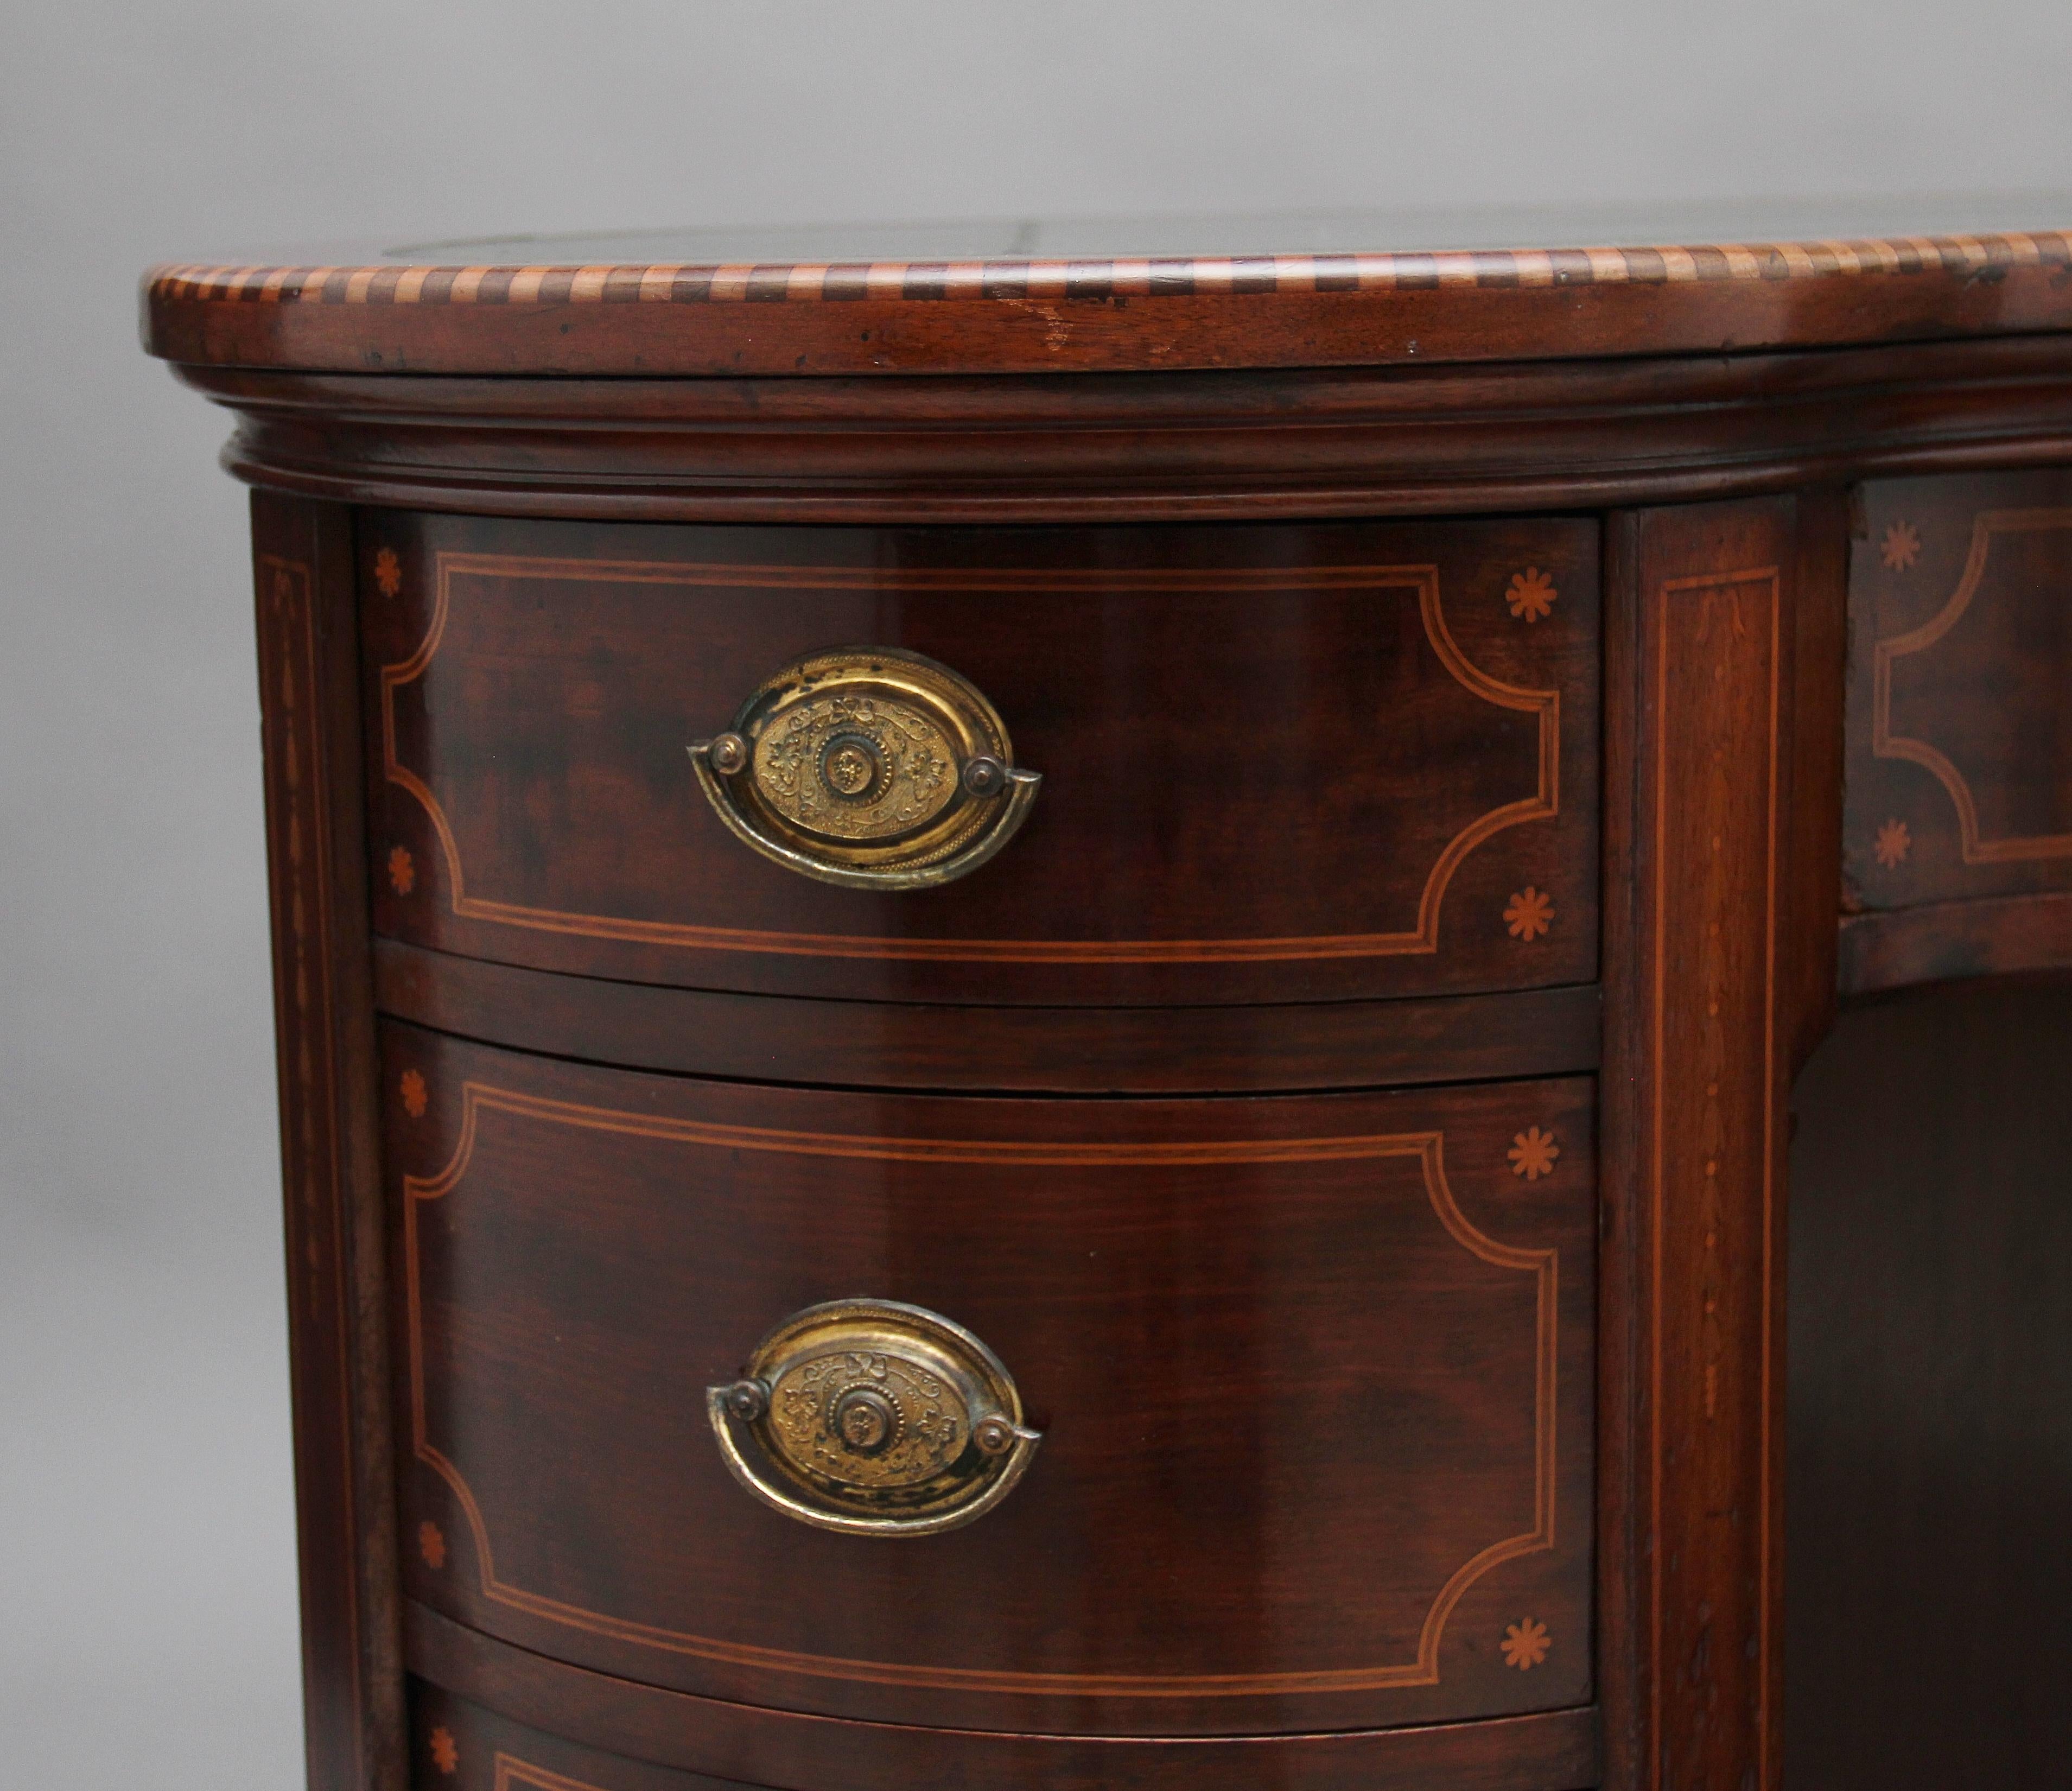 19th Century Inlaid Mahogany Kidney Shaped Desk with a Wonderful Provenance 6